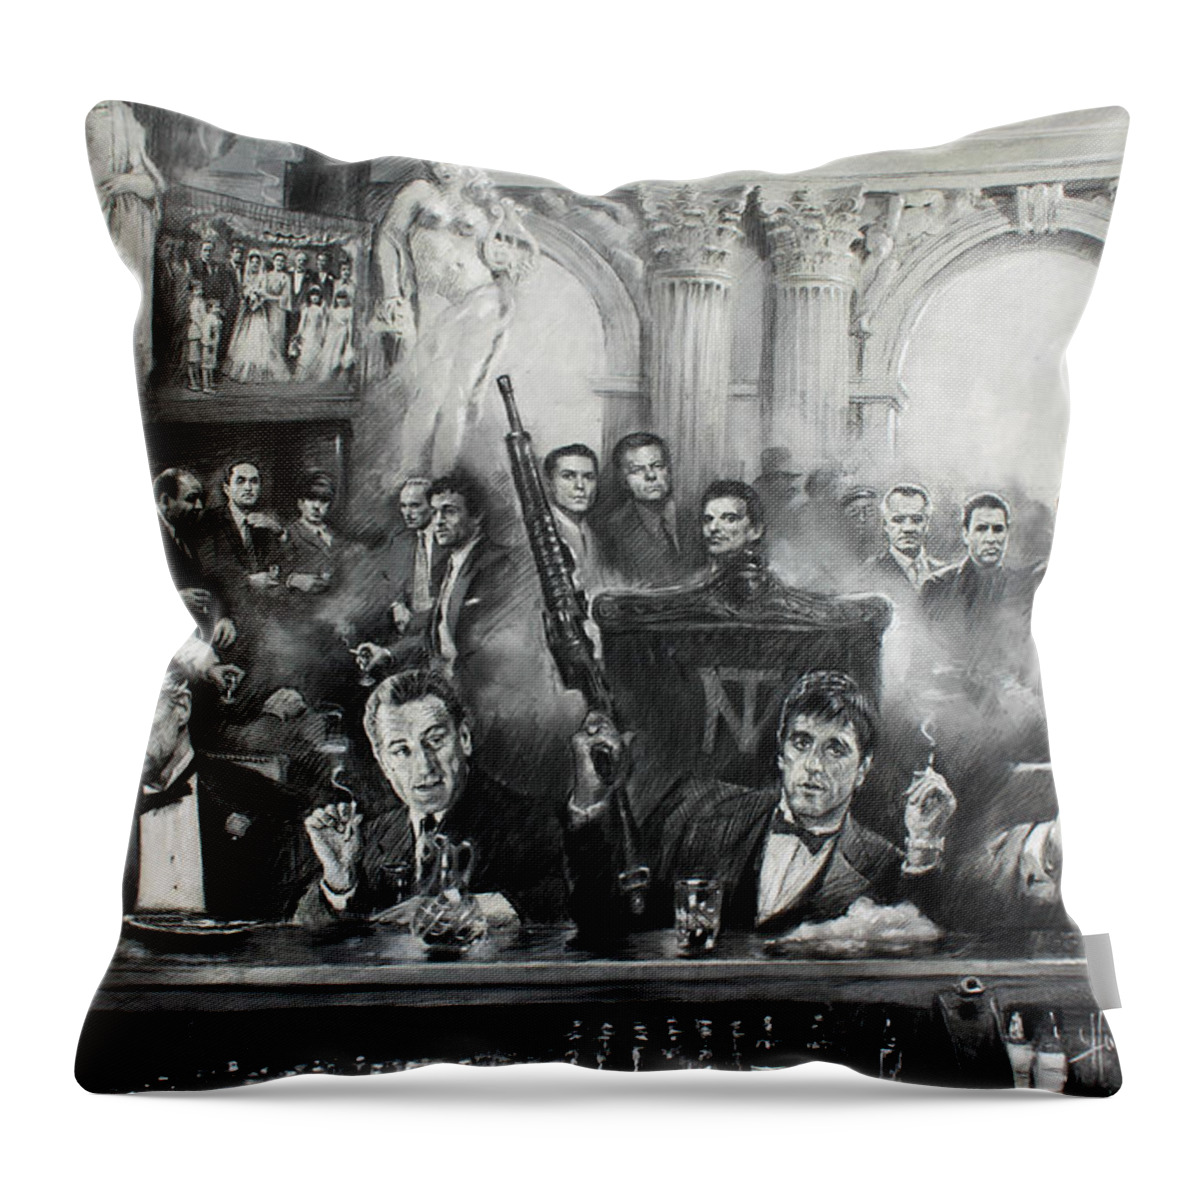 Gangsters Throw Pillow featuring the drawing Make Way For The Bad Guys by Ylli Haruni